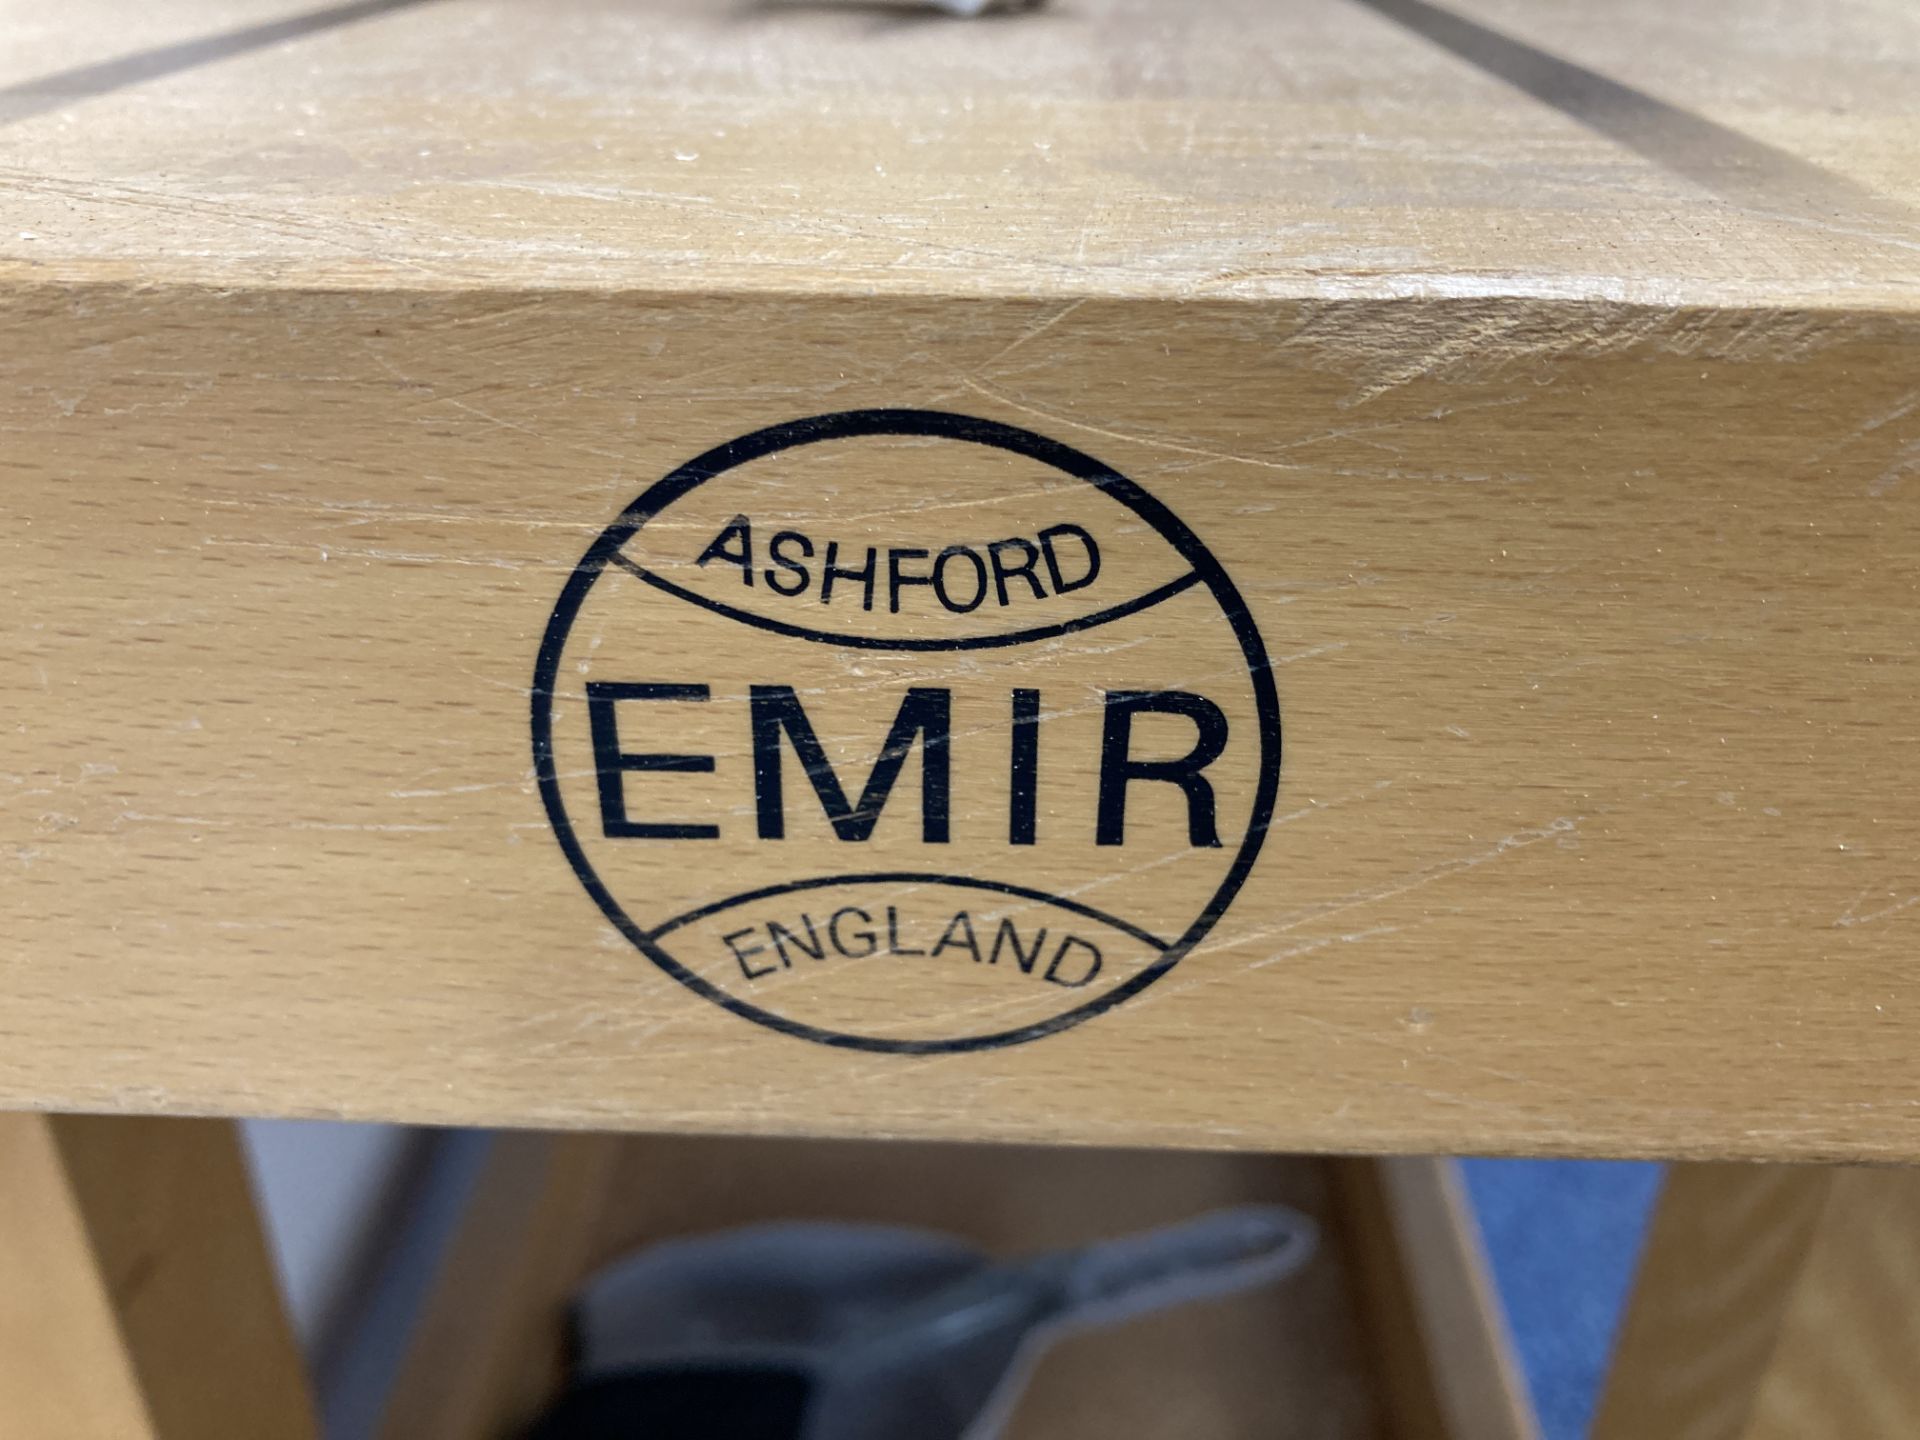 Emir woodworking bench - Image 2 of 2